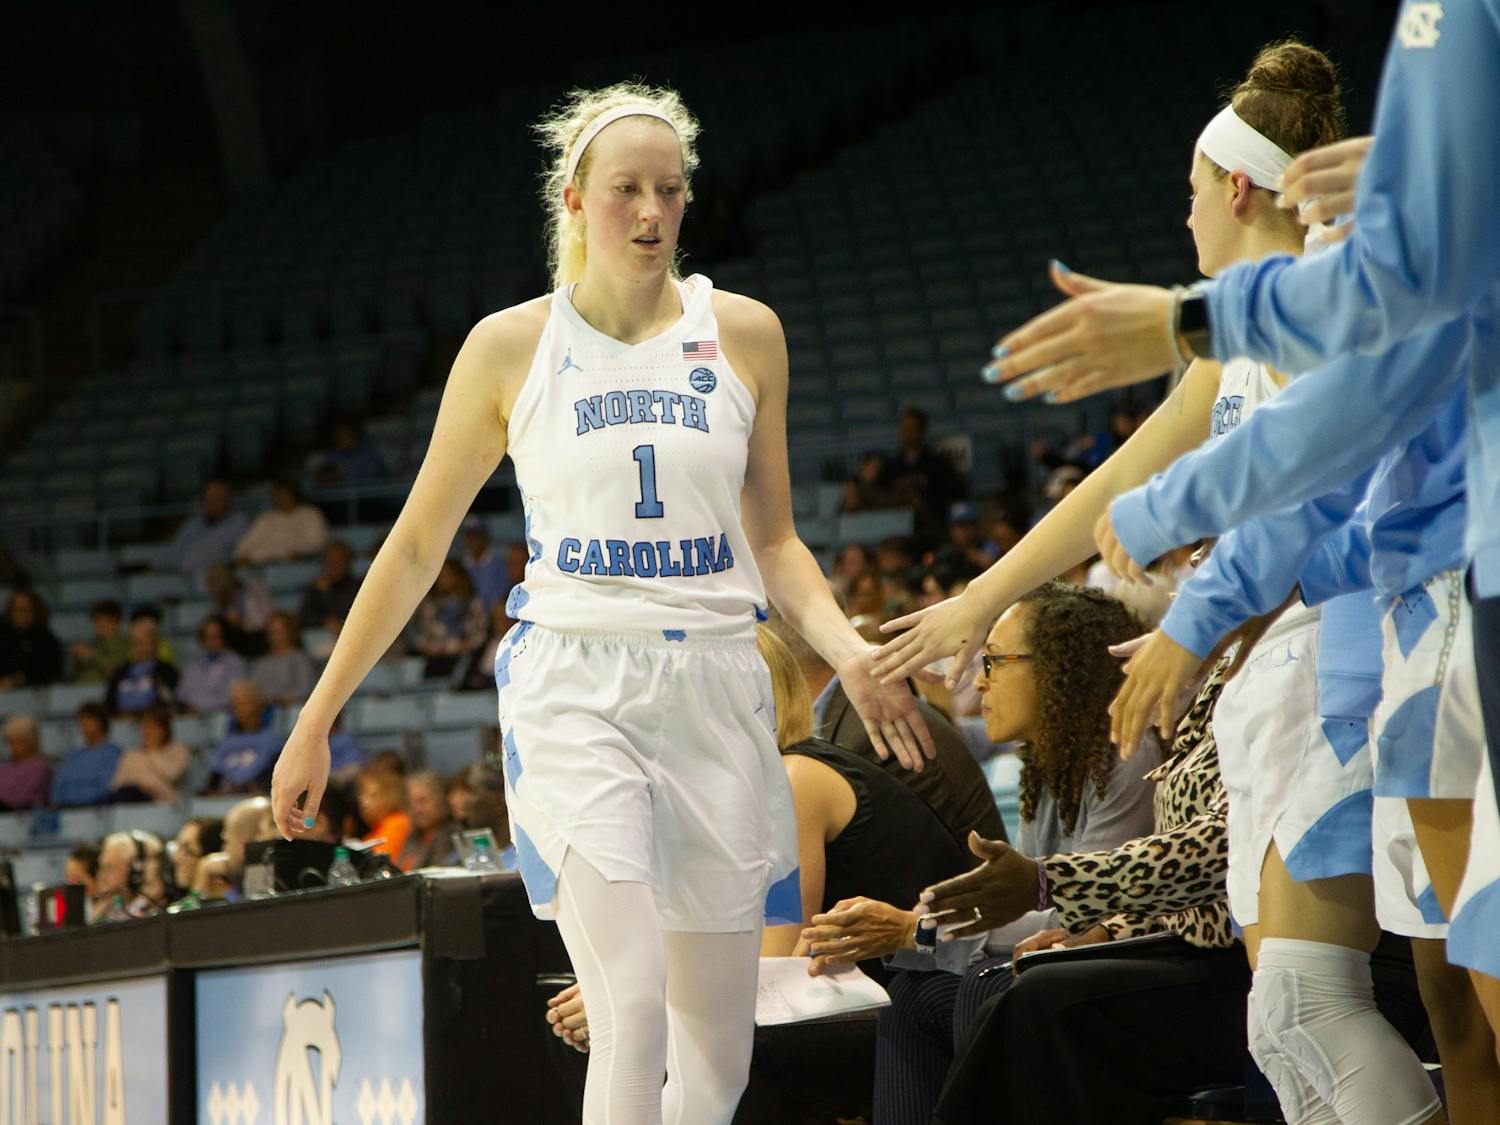 UNC senior guard Taylor Koenen (1) high-fives her teammates after the 3rd quarter during a game in Carmichael Arena on Thursday, Feb. 13, 2020. The Orange beat the Tar Heels 74-56.